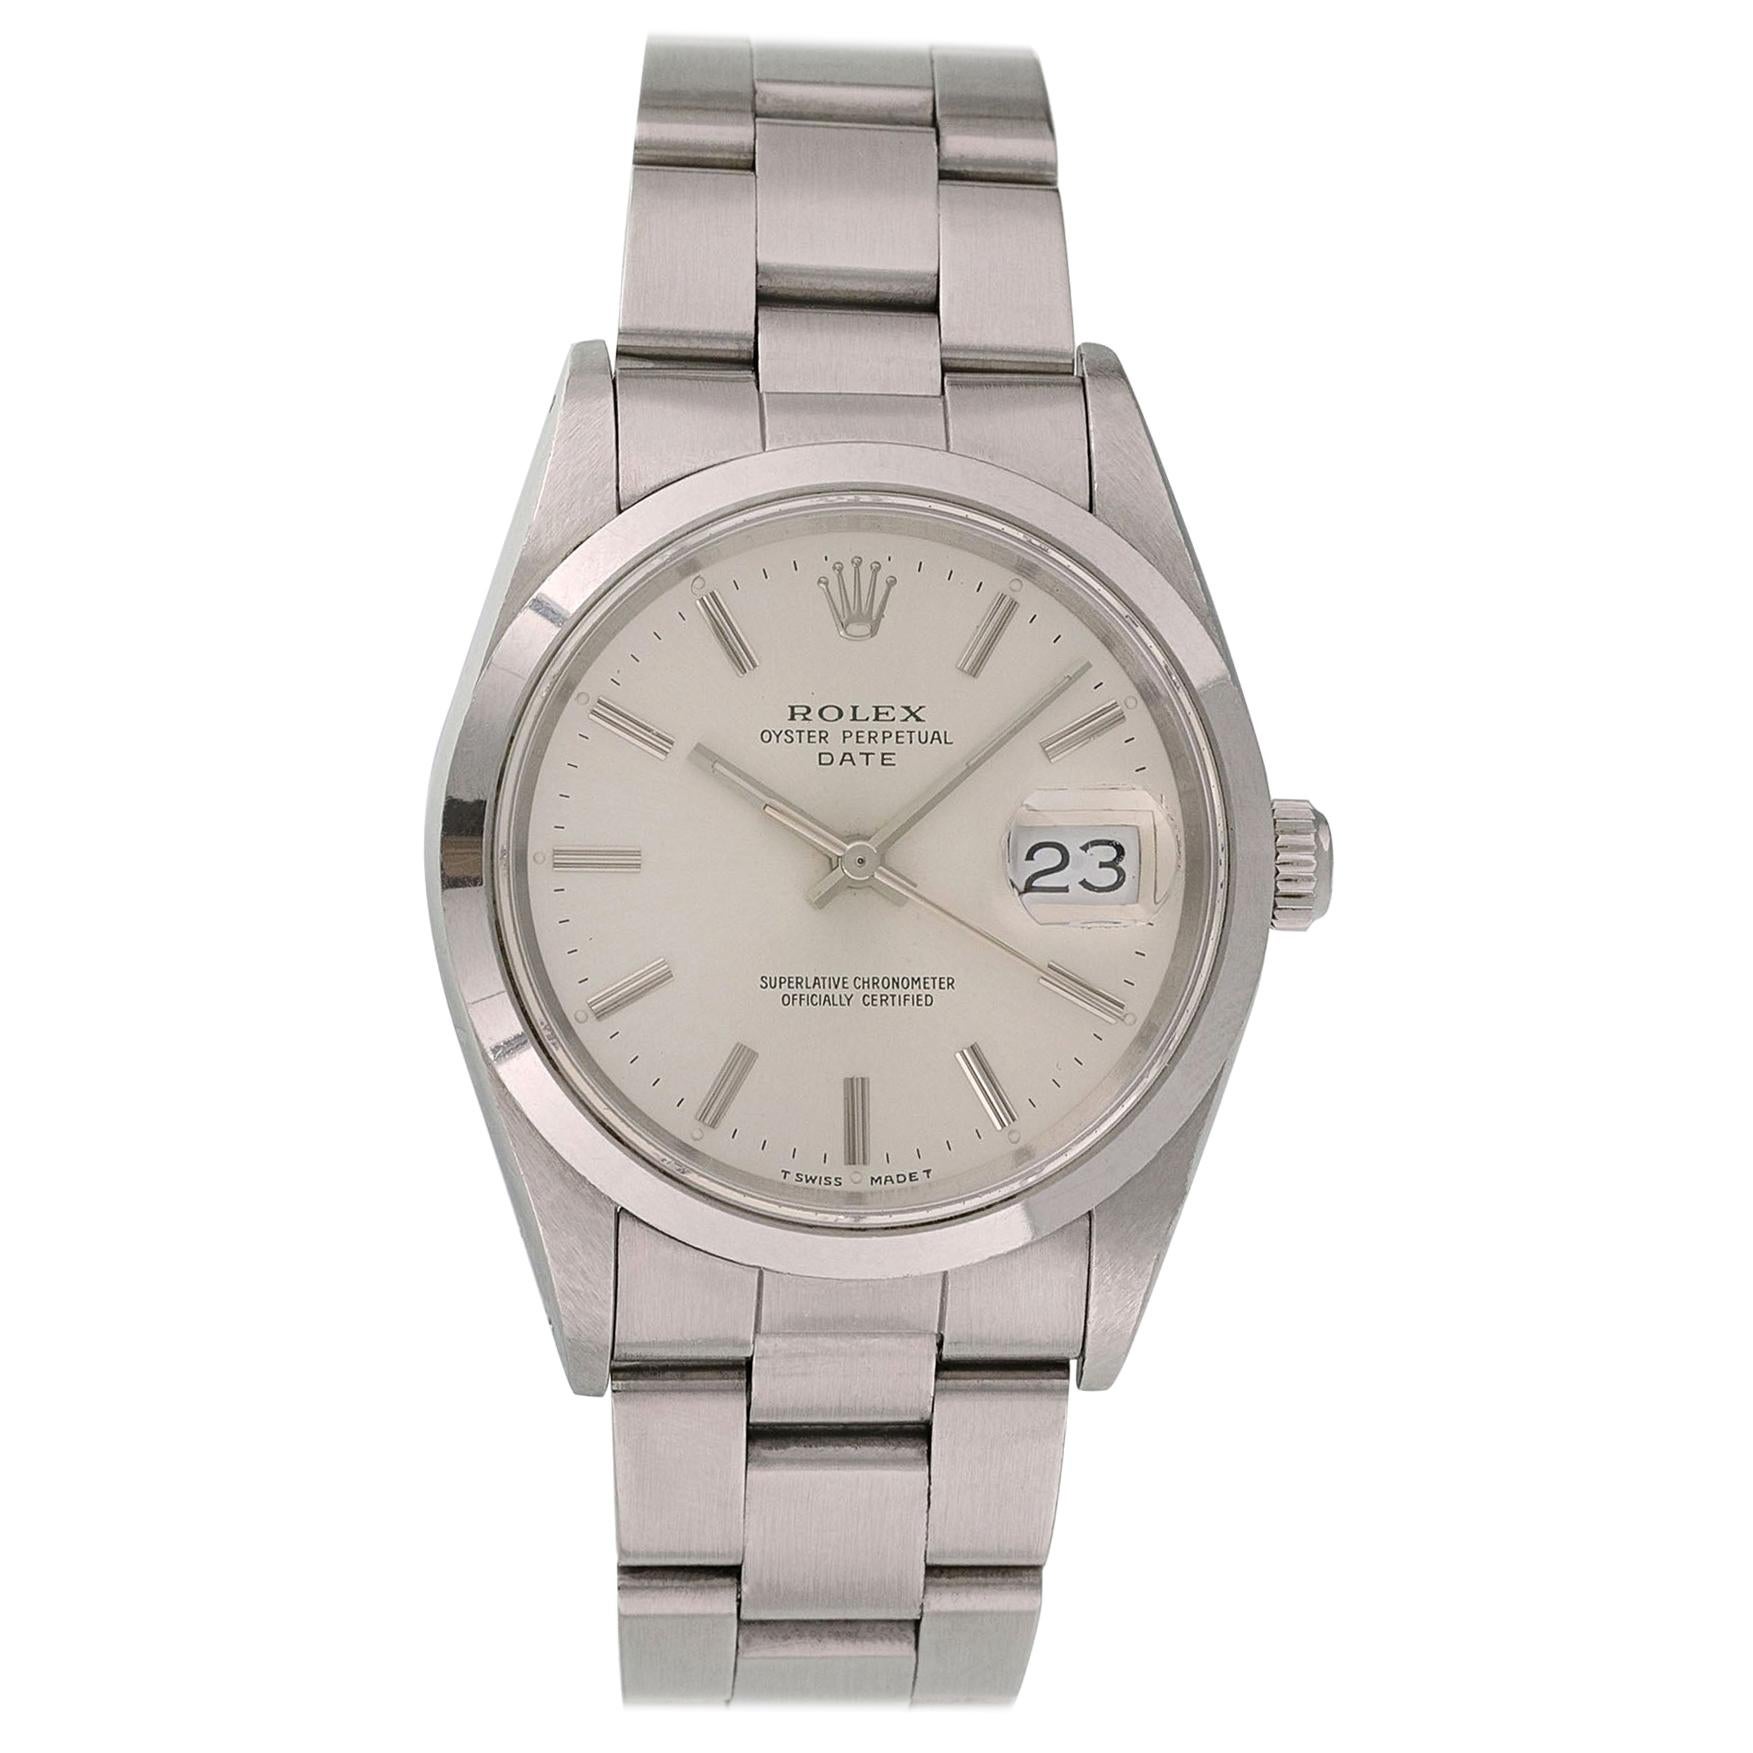 Rolex Oyster Perpetual Date 15200 Men’s Watch Box Papers For Sale